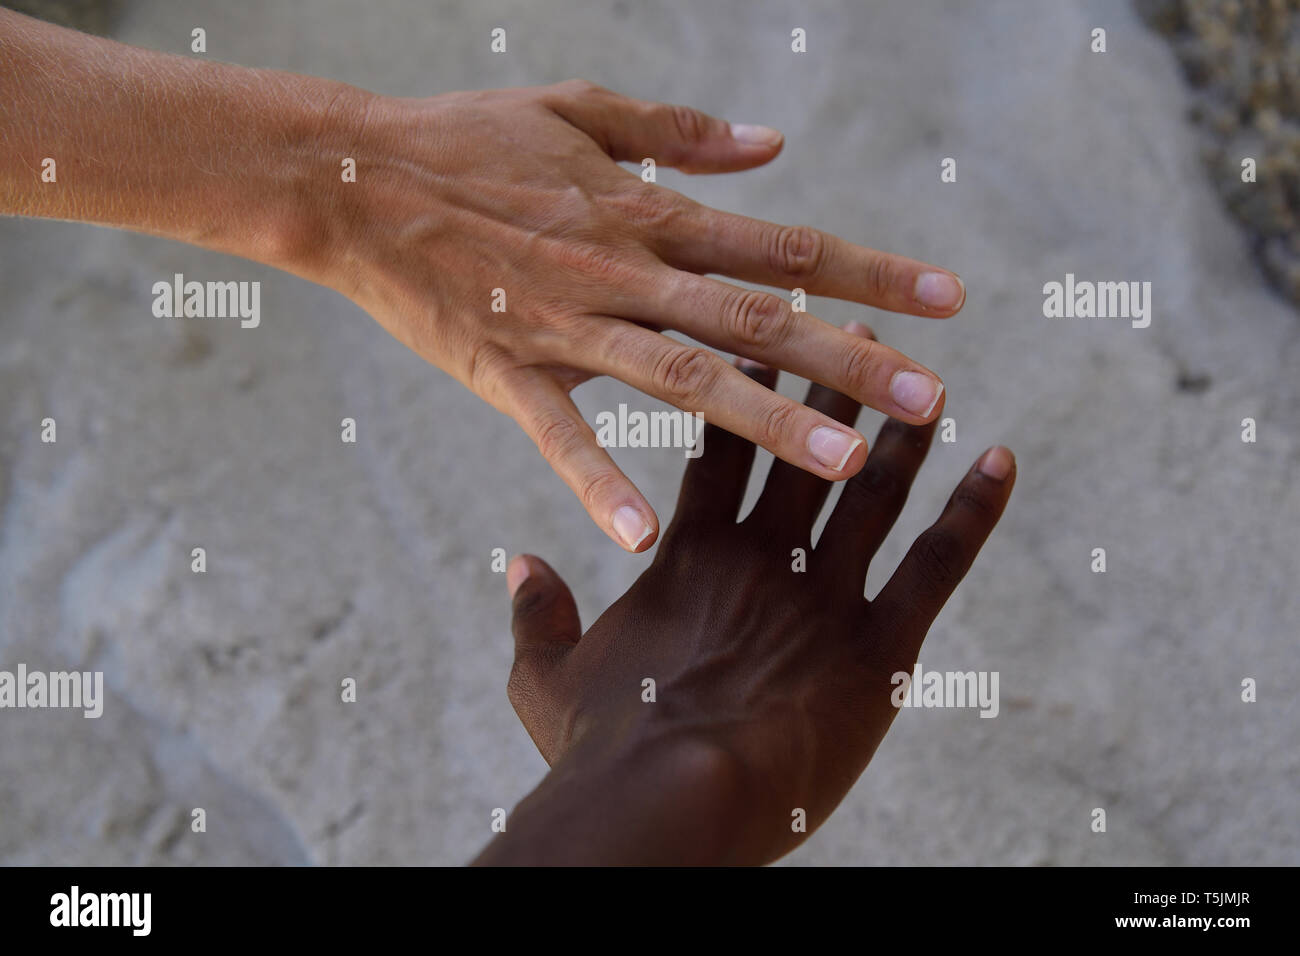 Hands of two women Stock Photo